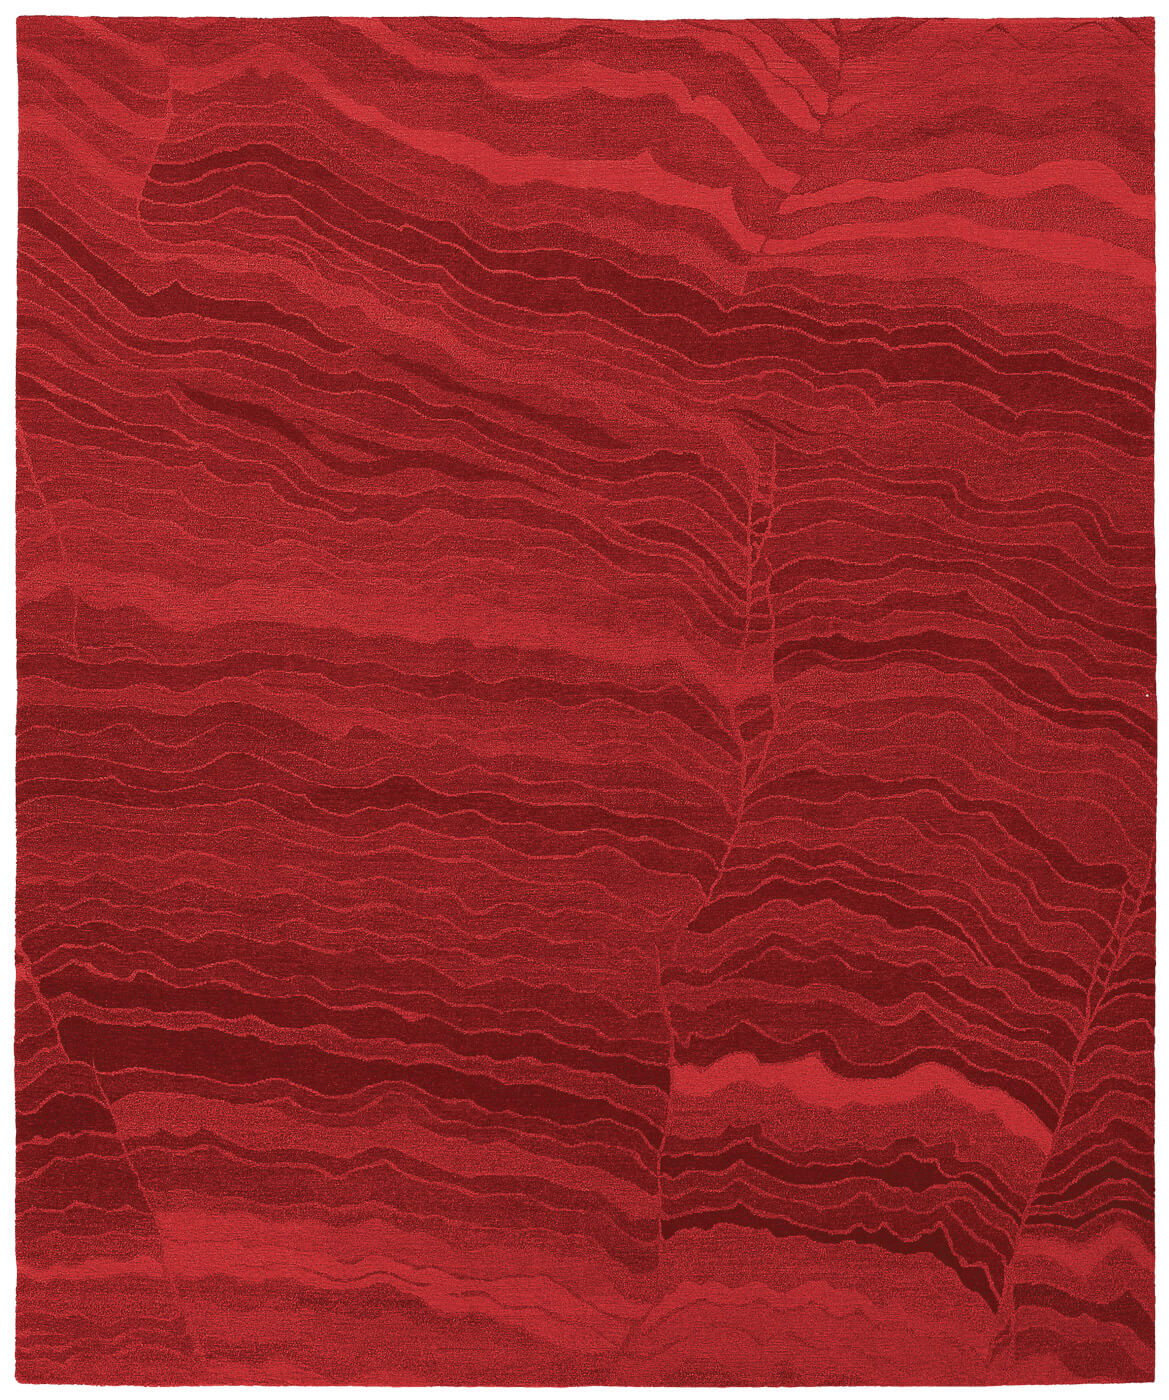 Hand-woven Wool Red Luxury Rug ☞ Size: 250 x 300 cm